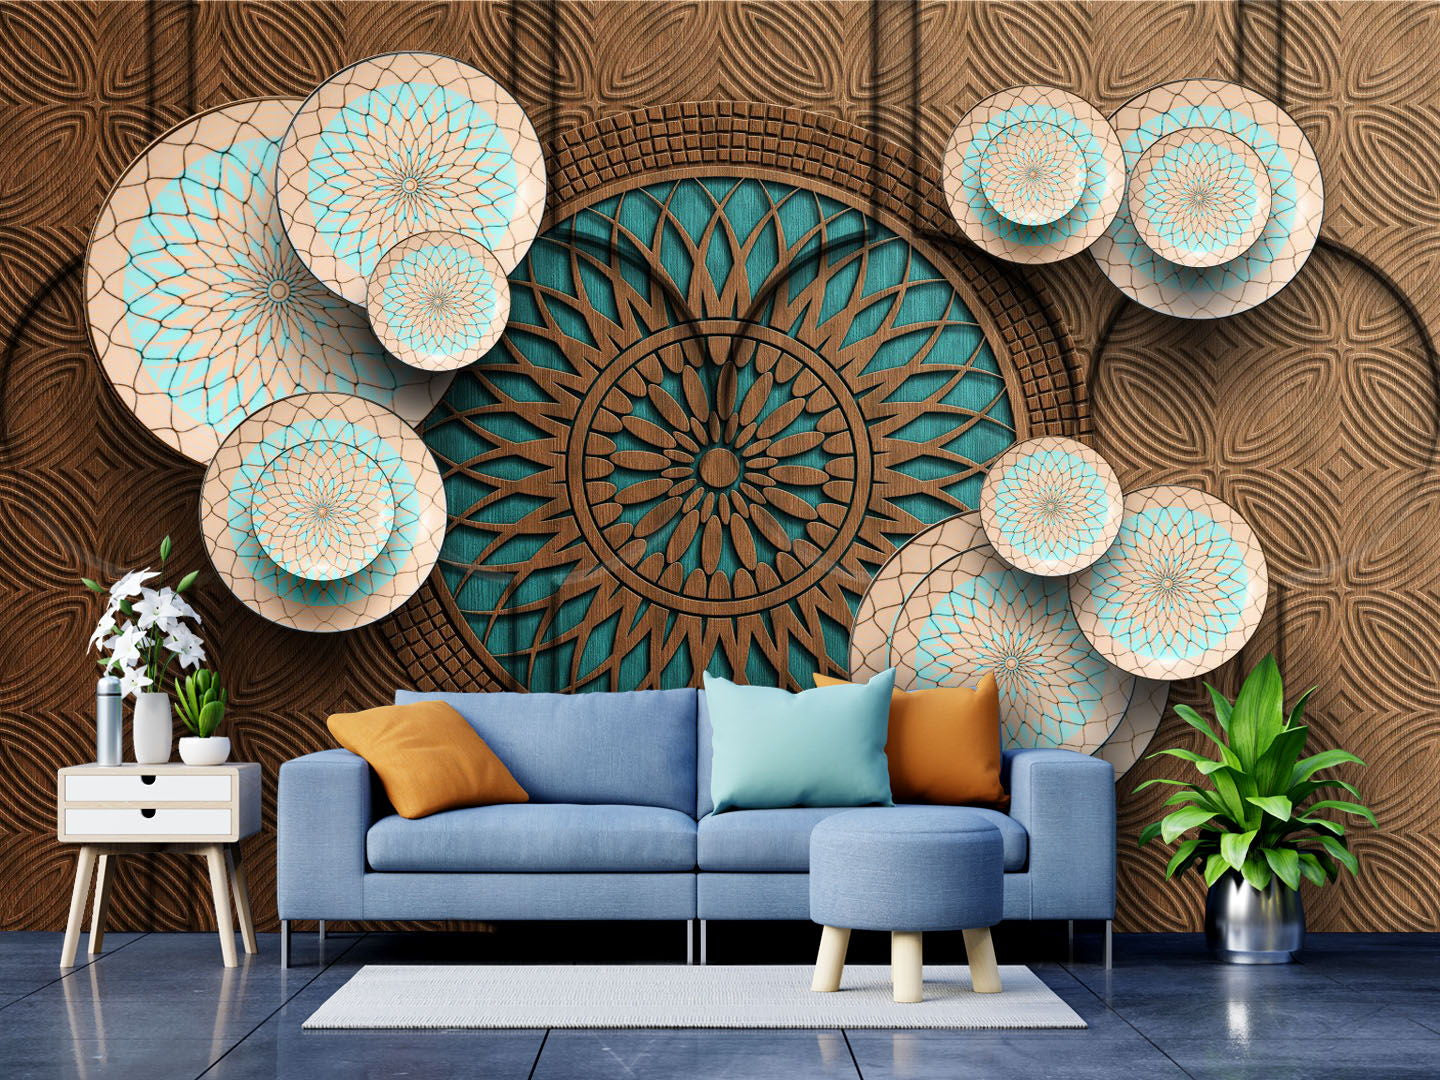 999Store 3D Stones and Statues Mural Wallpaper for Wall ,Wallpaper1102 -  999Store